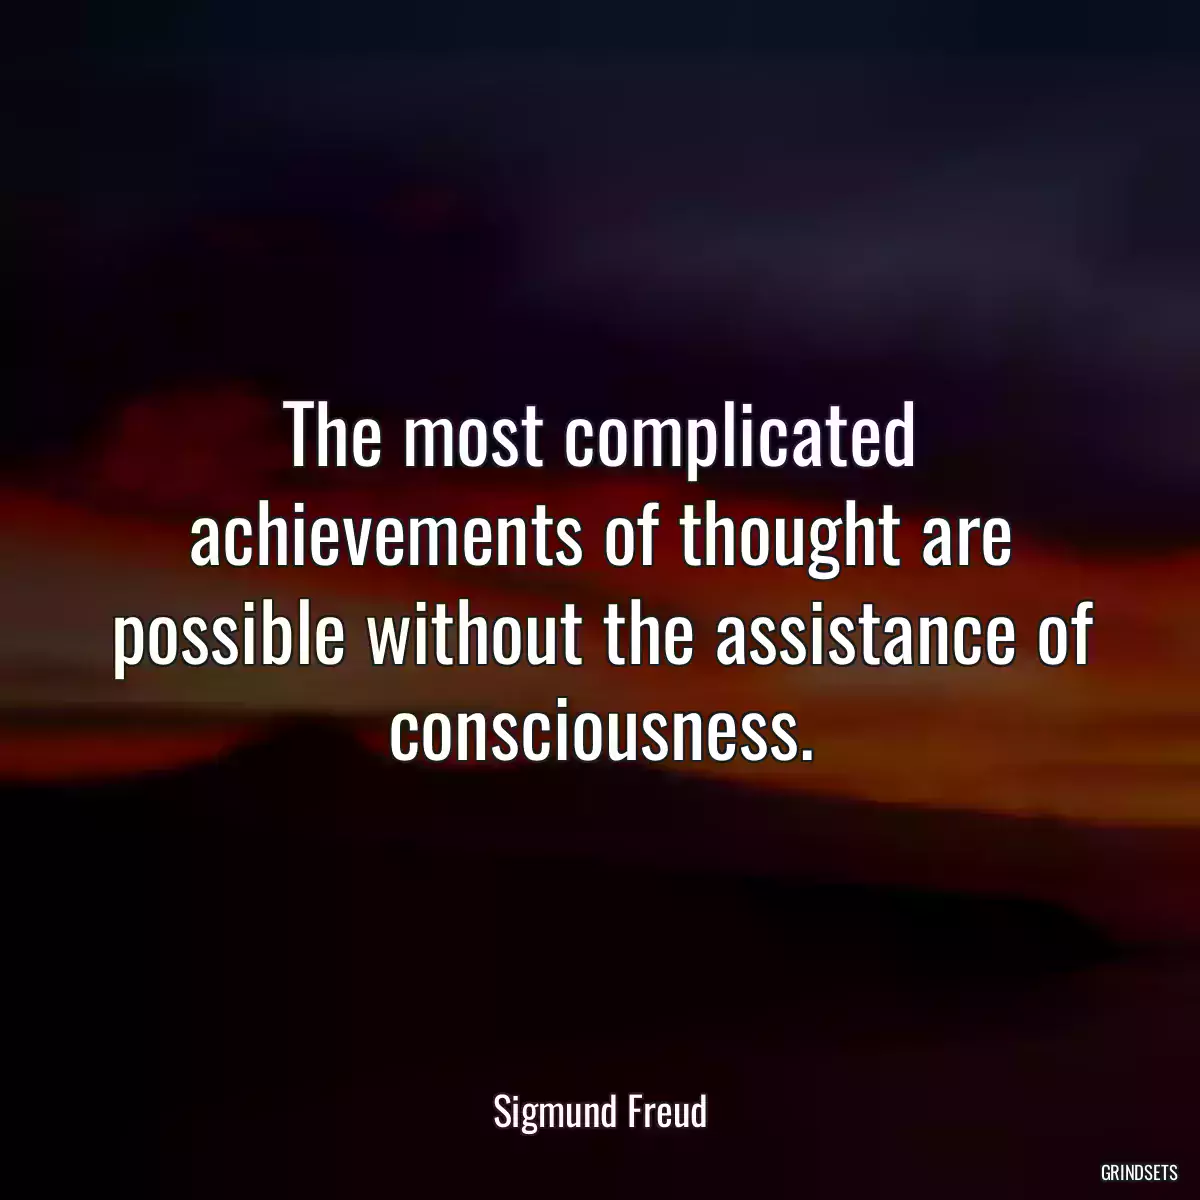 The most complicated achievements of thought are possible without the assistance of consciousness.